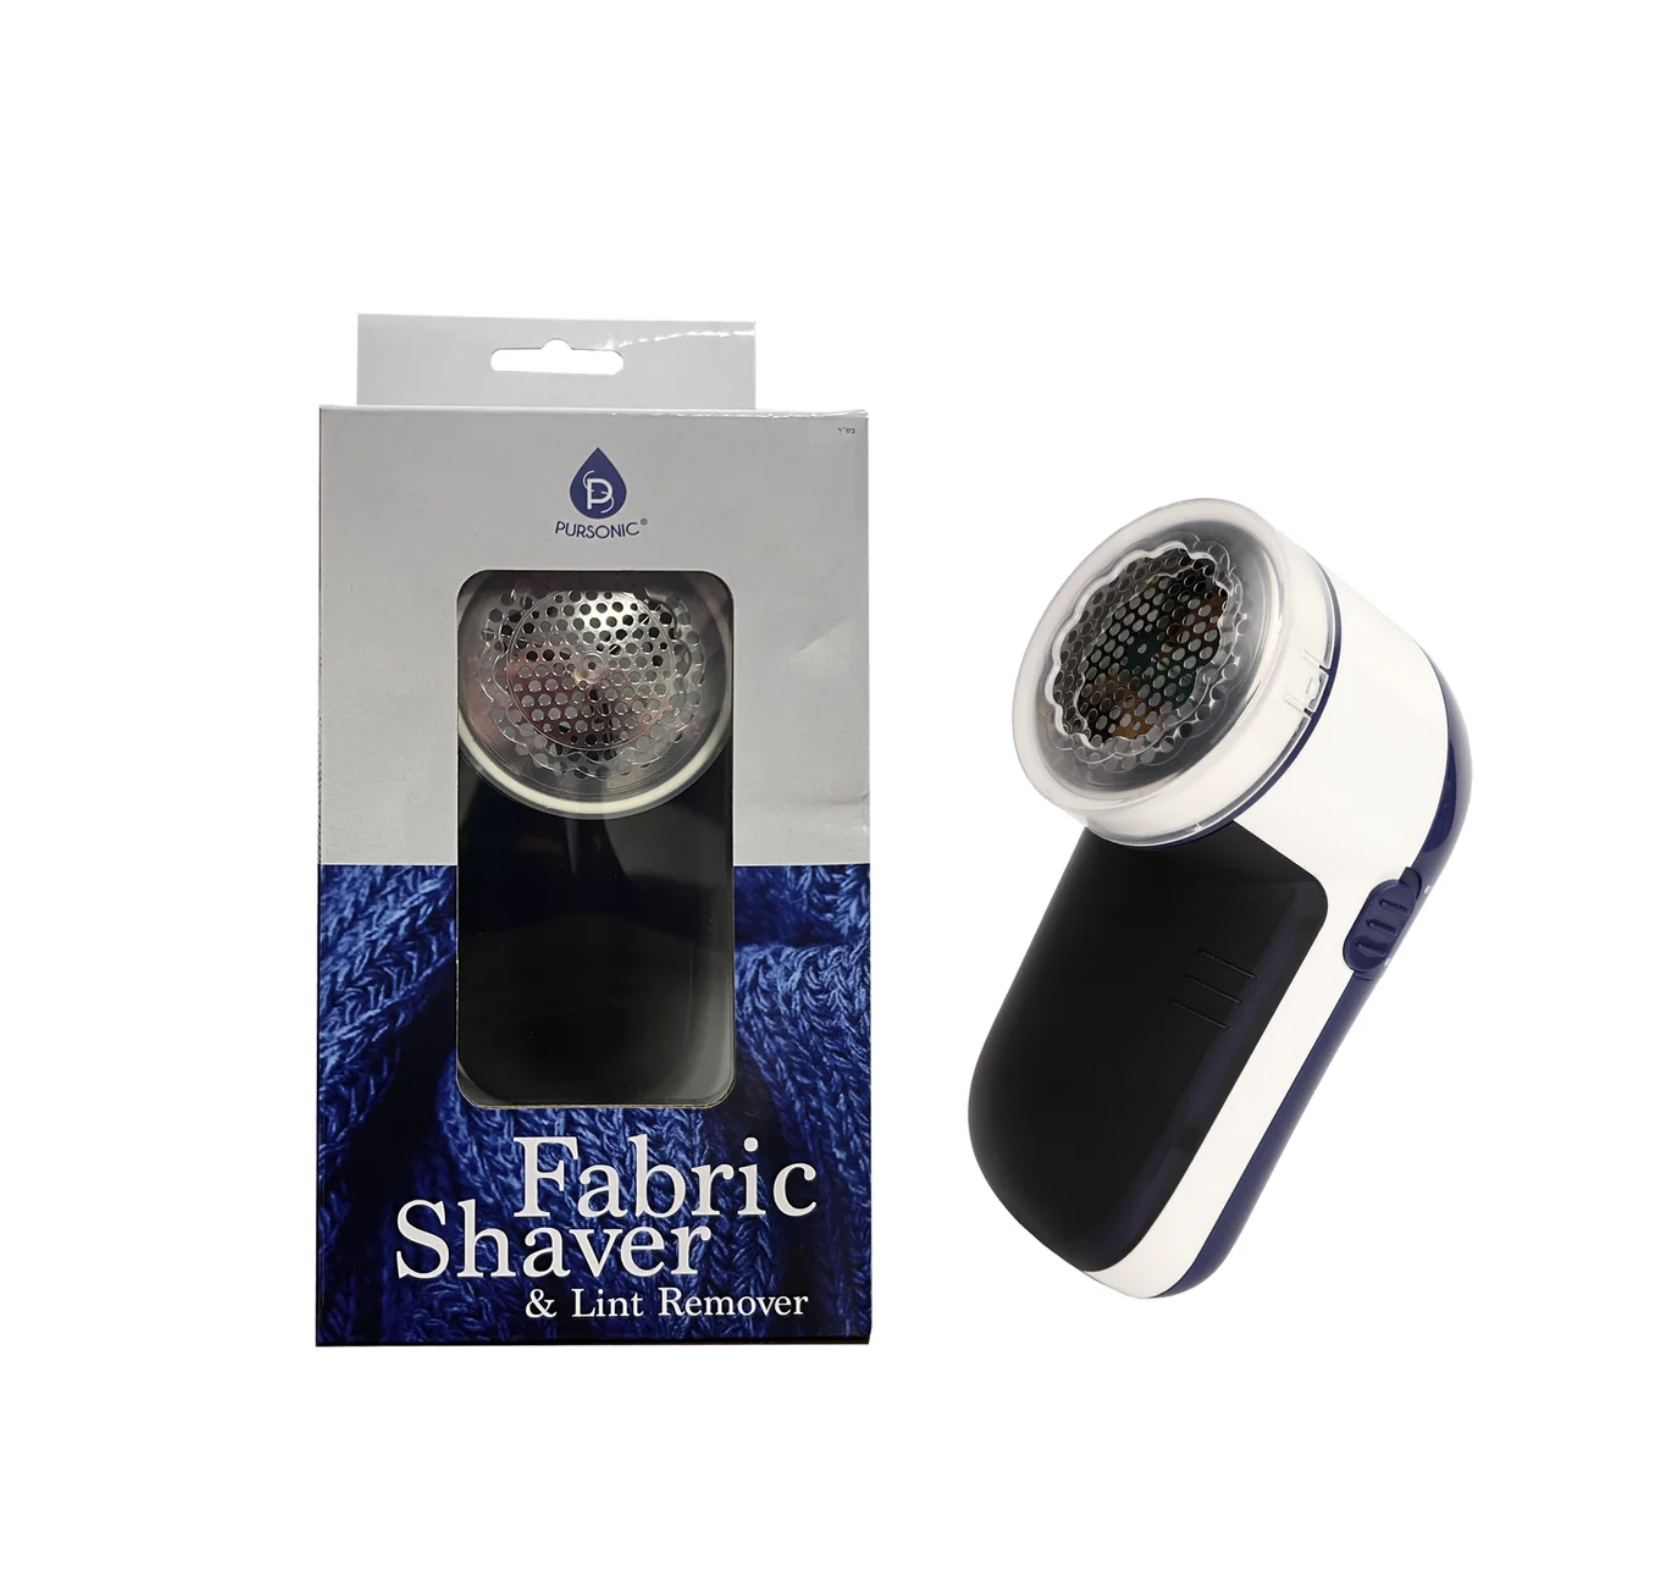 Fabric Shaver & Lint Remover - The Nest's Favorite